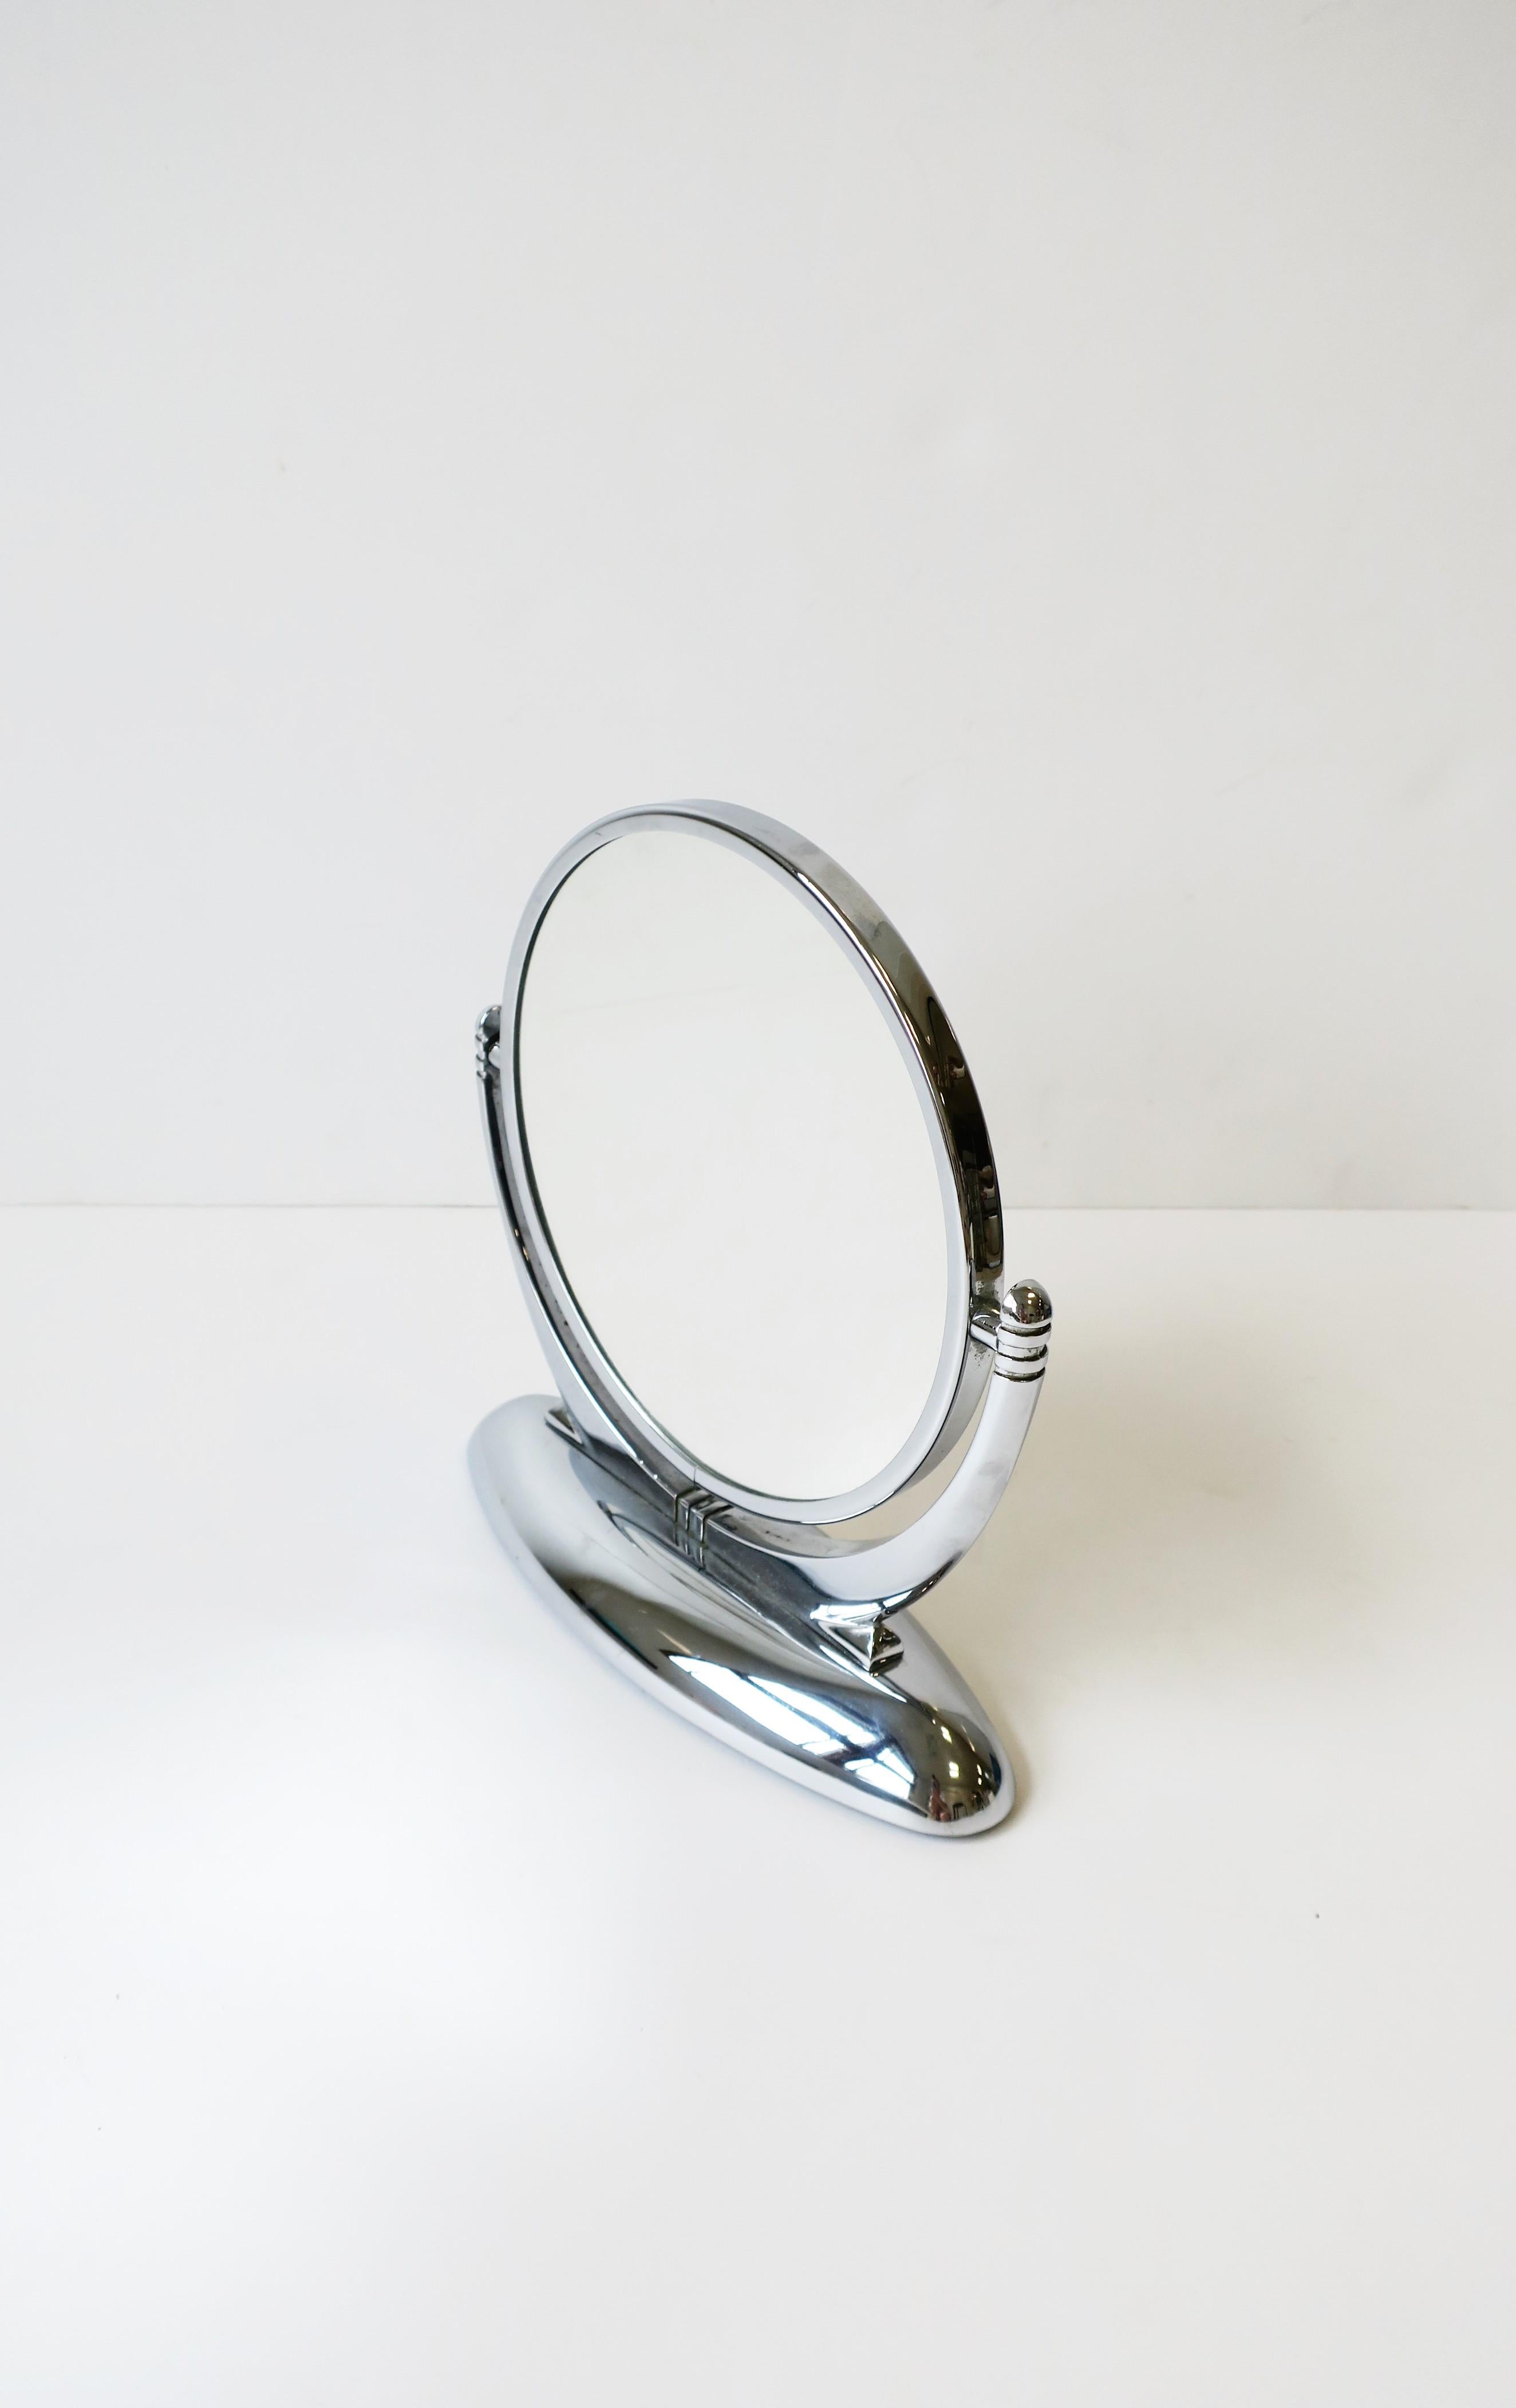 An Art Deco period two-sided chrome vanity table mirror, circa 1930s. One side is magnified. Mirror is substantial and well made. Measures: 8.5